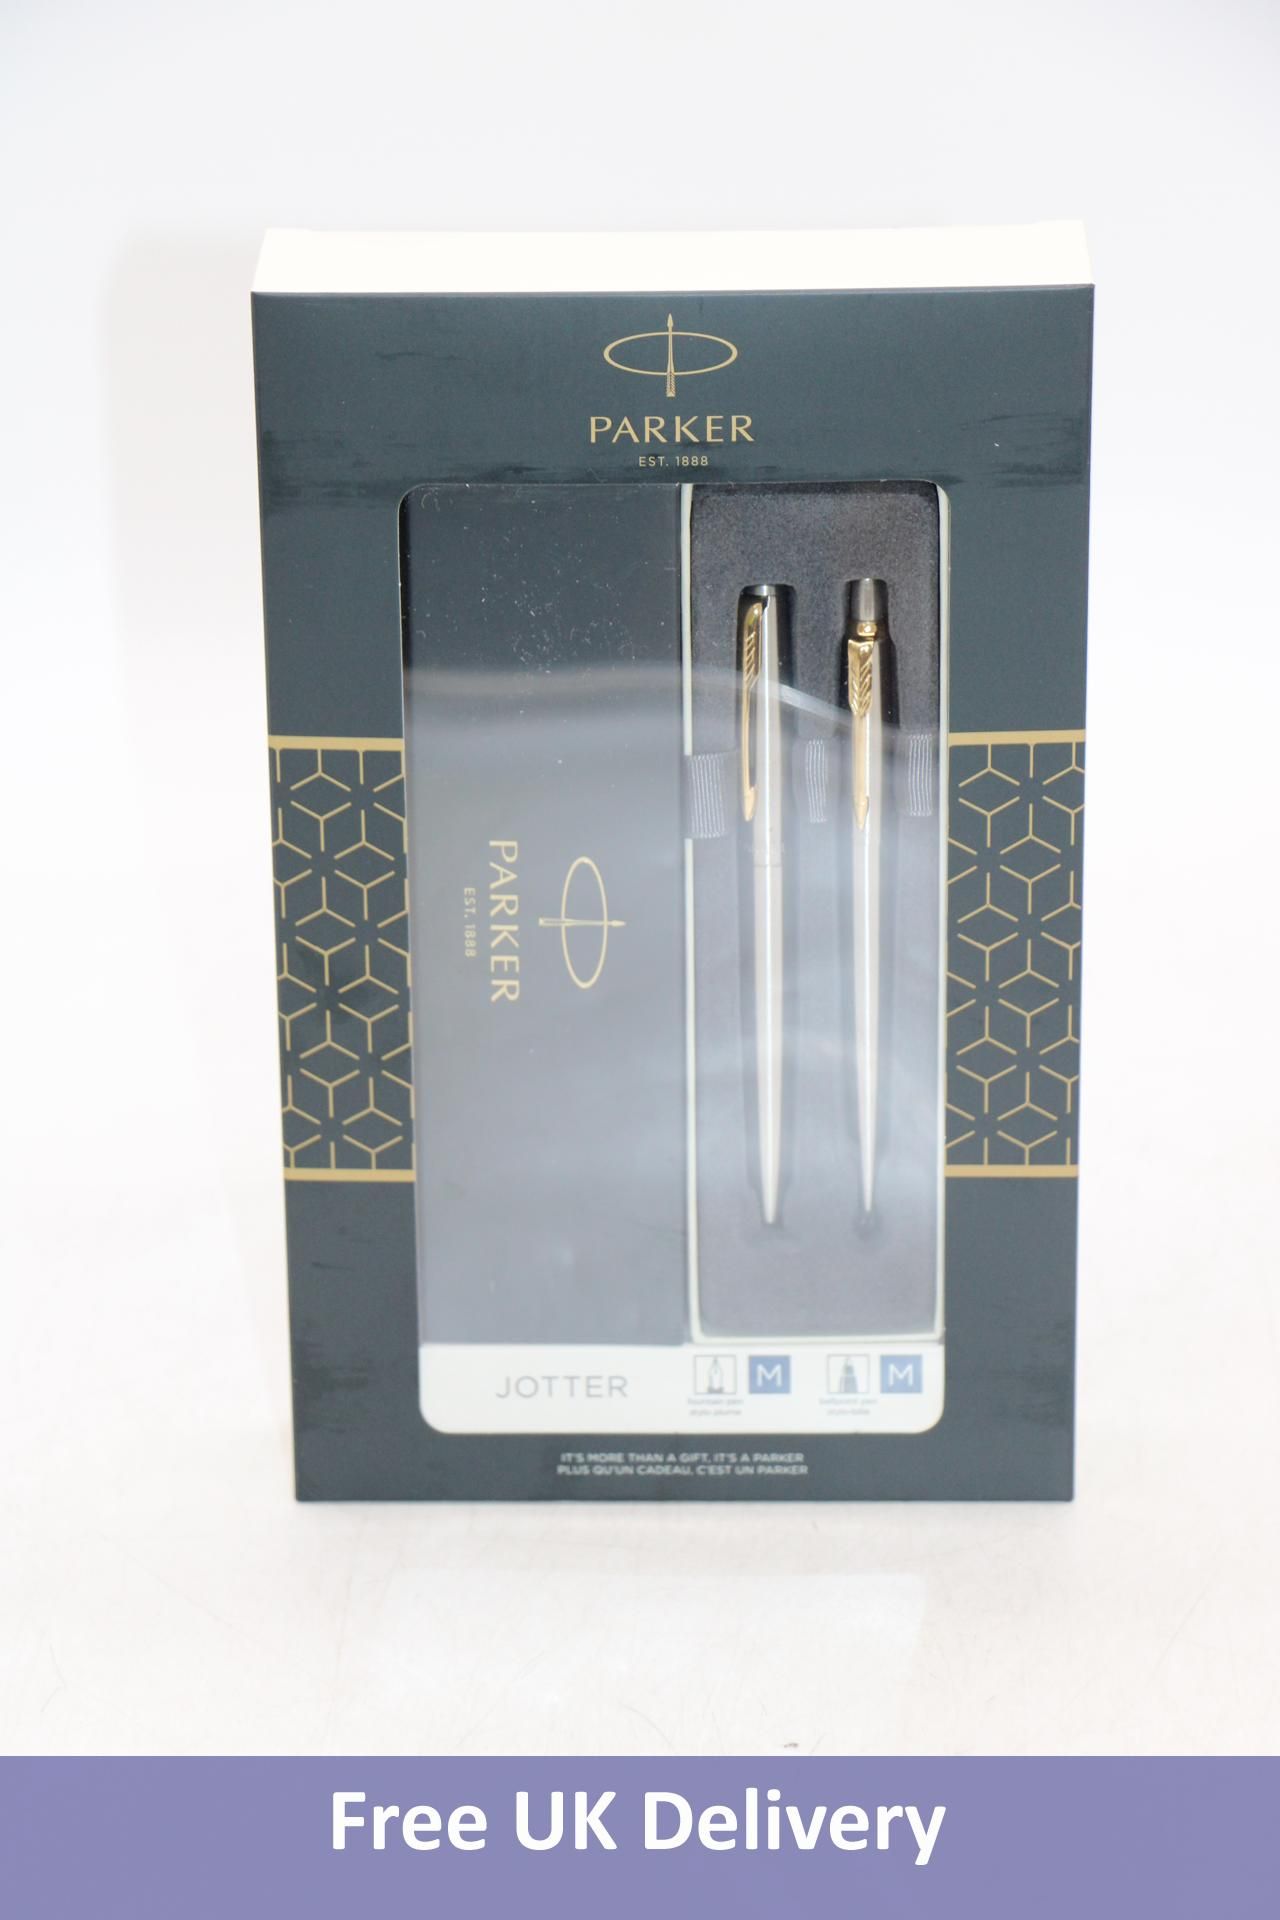 Three Parker Pen Gift Sets, Silver/Gold